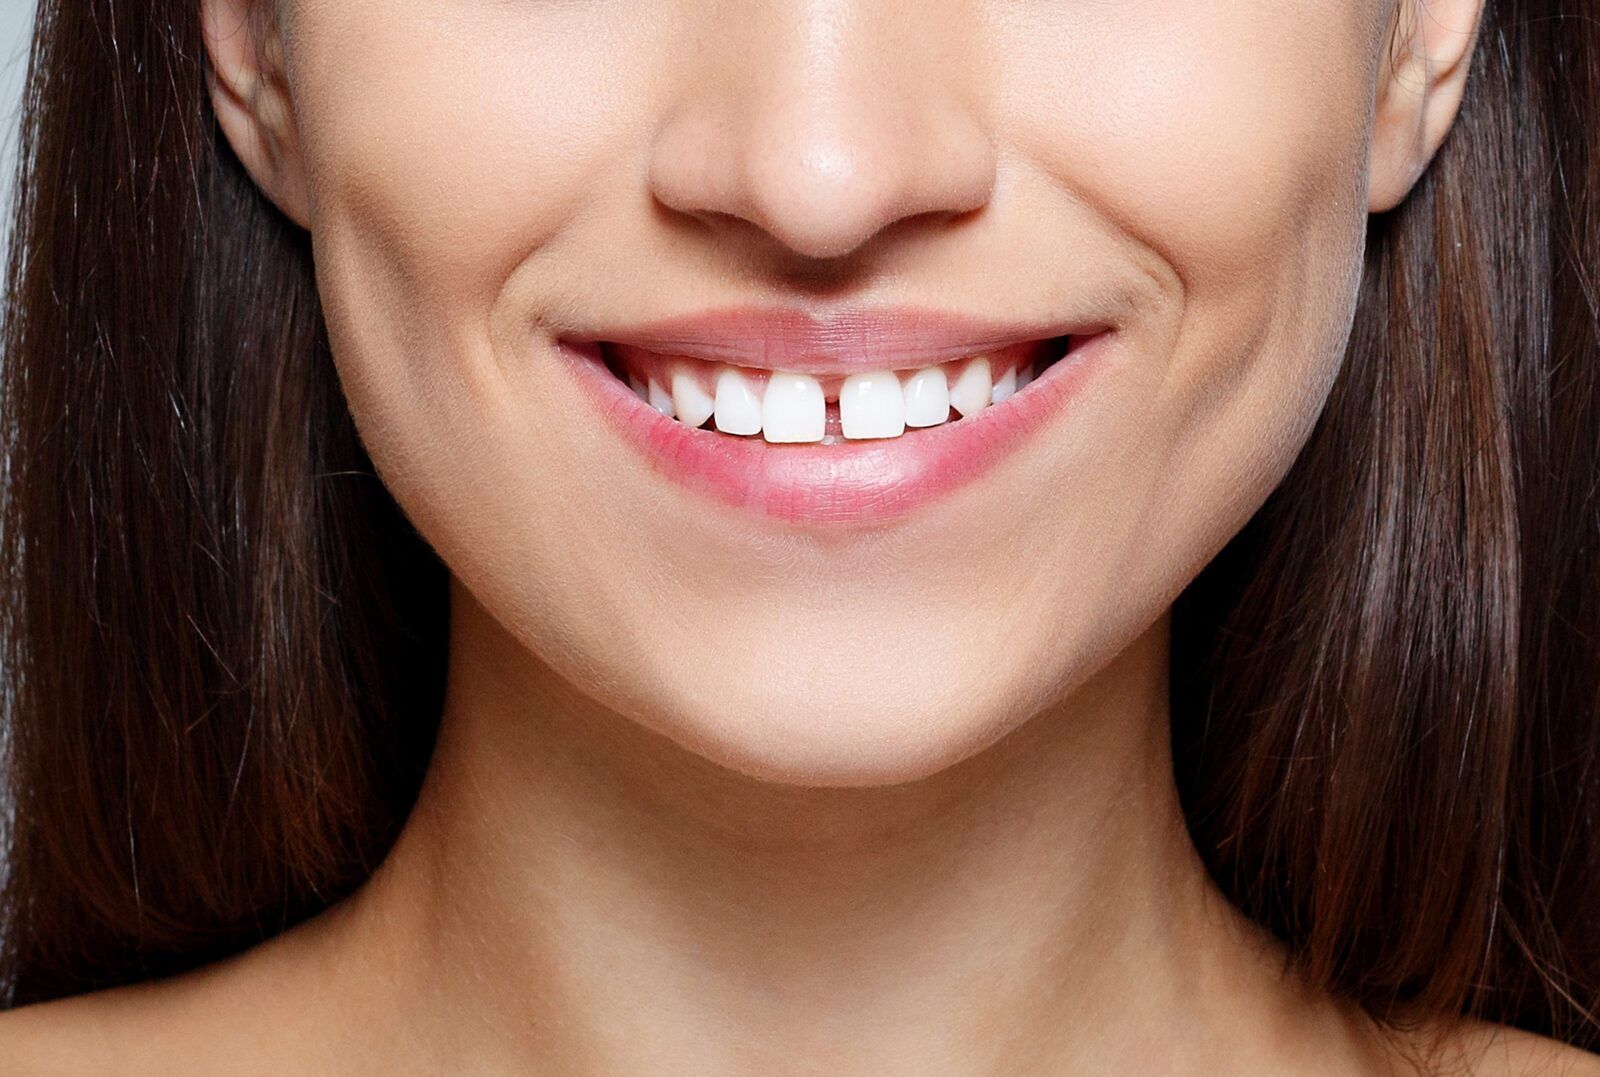 pretty woman smiling with gaps between her teeth